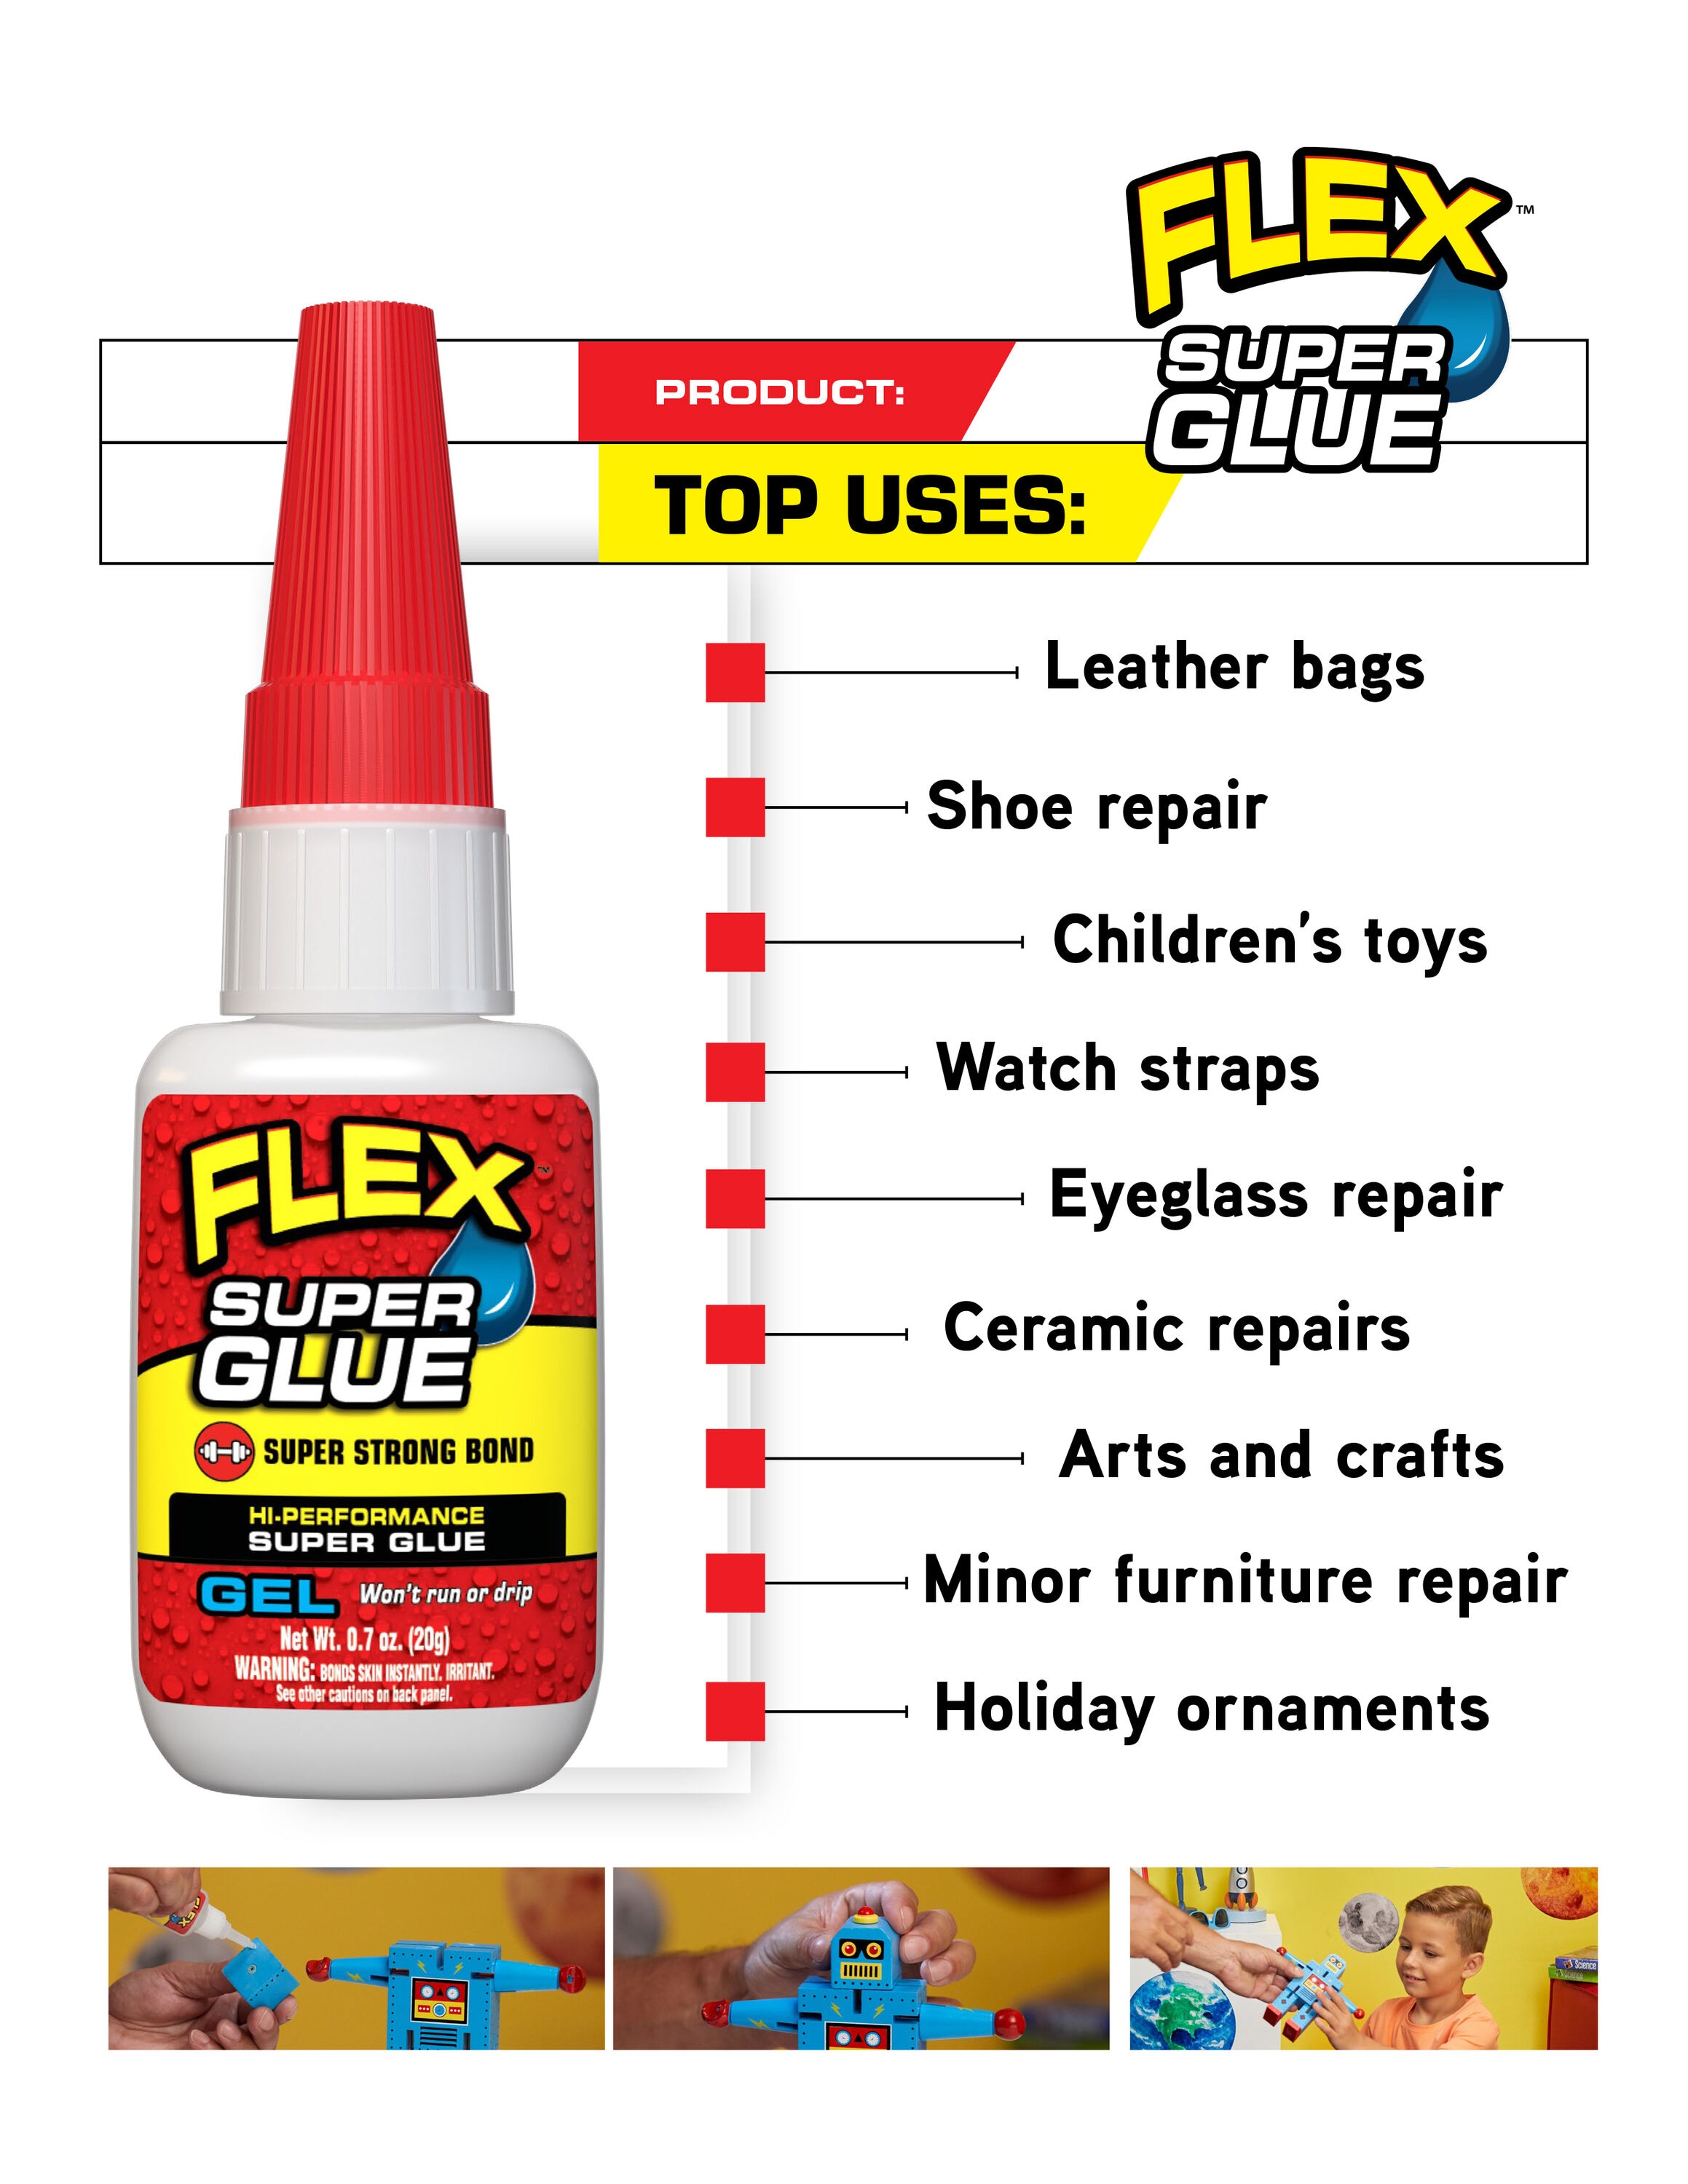 Toy Glue 20g,Craft Glue,Toy Craft Glue Quick Dry Clear,Instant Super Glue  for Toy,Toy Model,Craft,DIY,Metal, Plastic, Rubber, Wood, Leather,Card